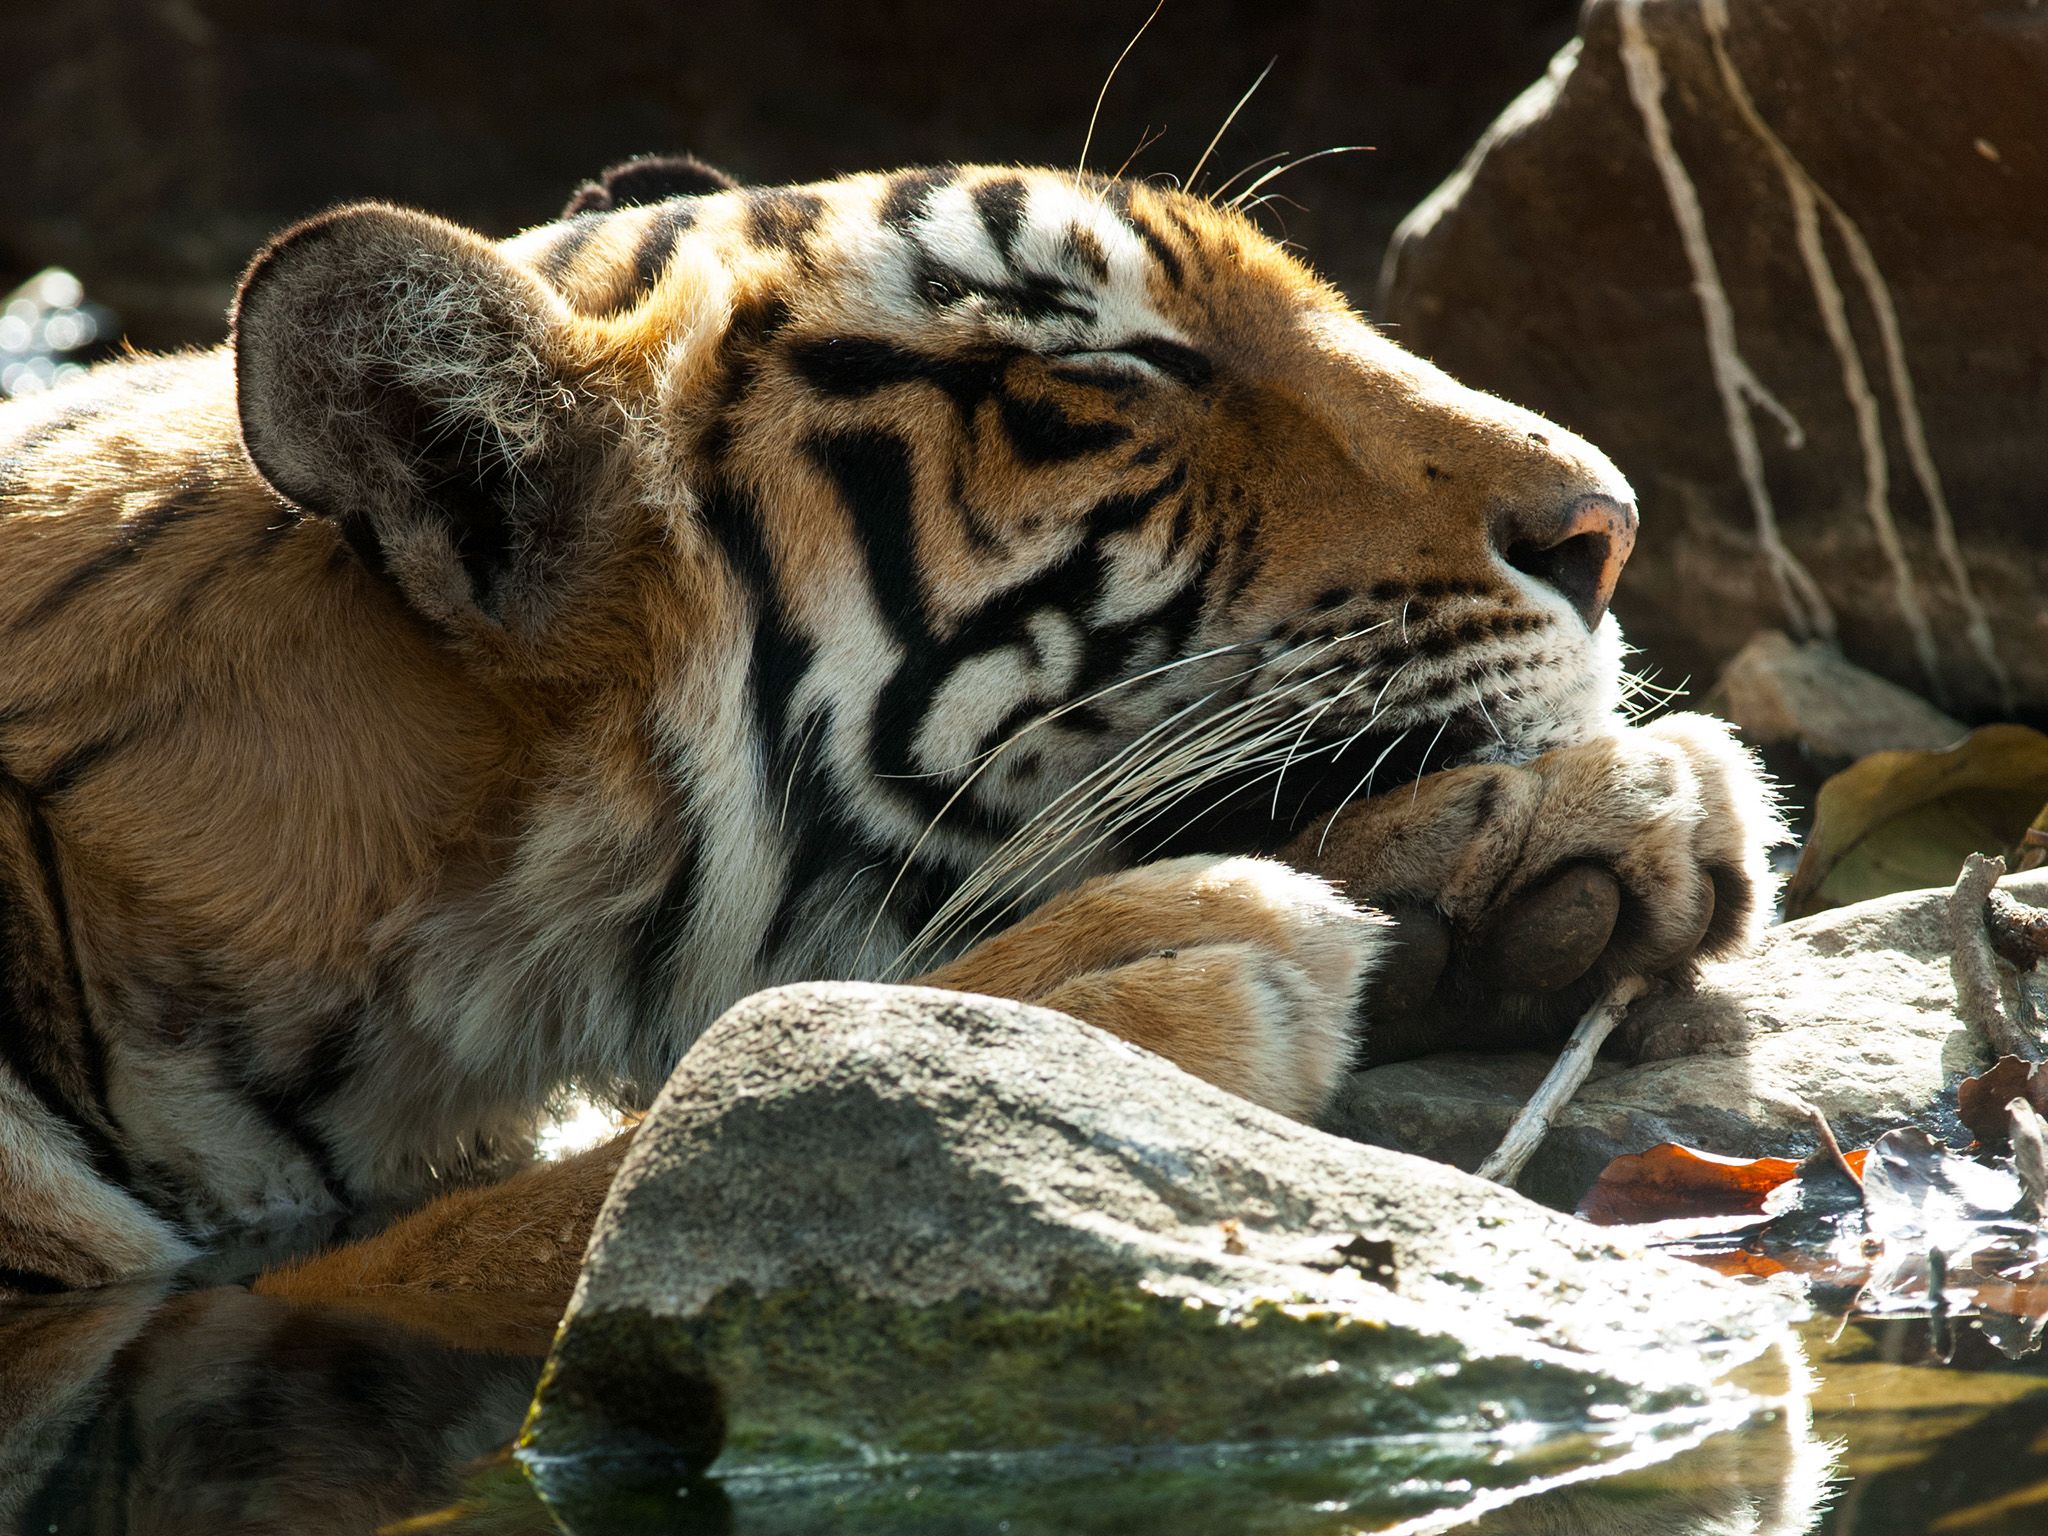 Sundari in the lake of the Rajbagh Area, Ranthambore National Park. This image is from Tiger's... [Photo of the day - February 2015]